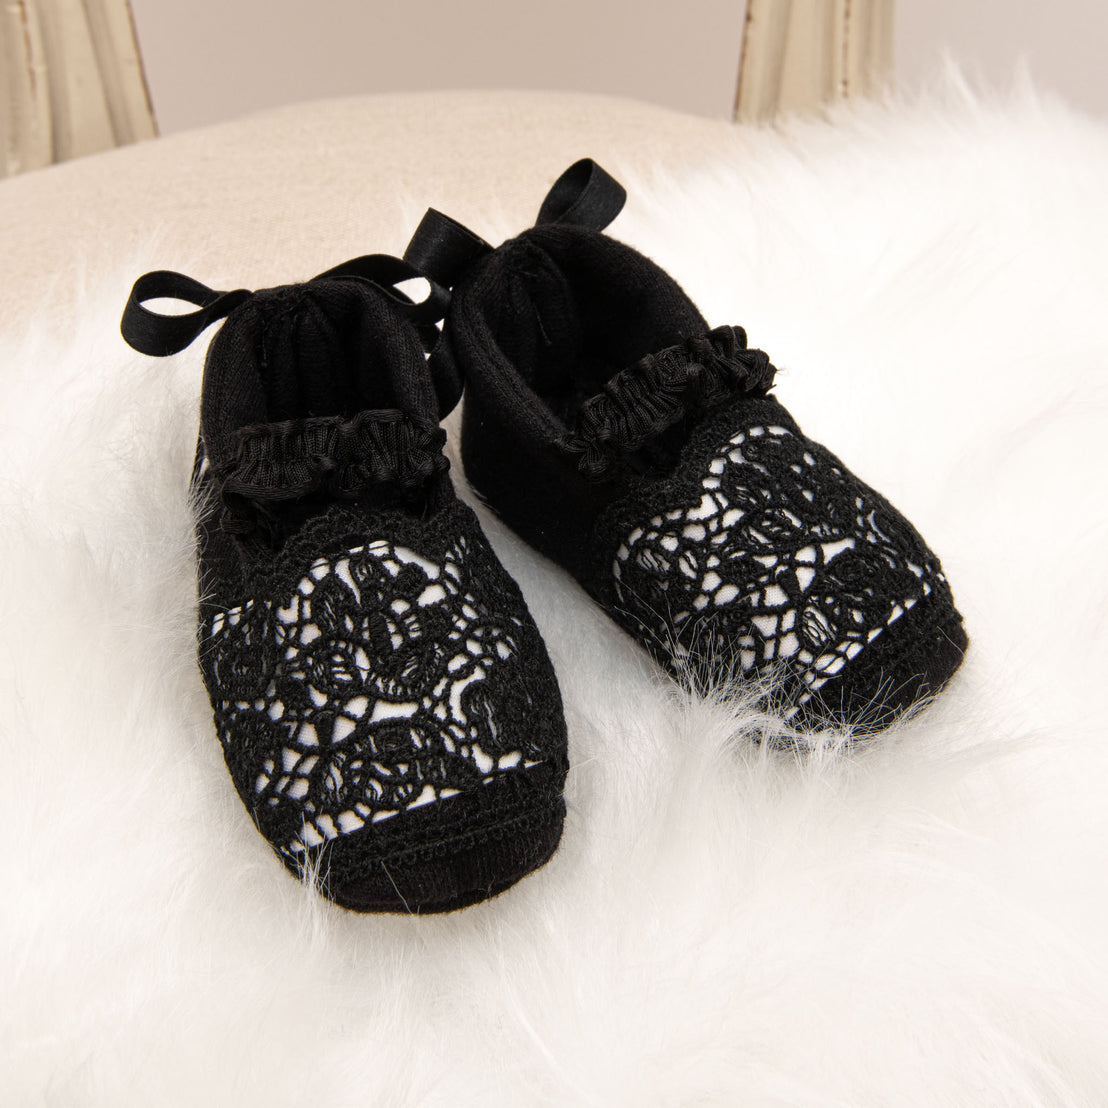 A pair of June Black Lace Booties with ribbon ties, positioned on a soft white fur surface, perfect as a baby shower gift.